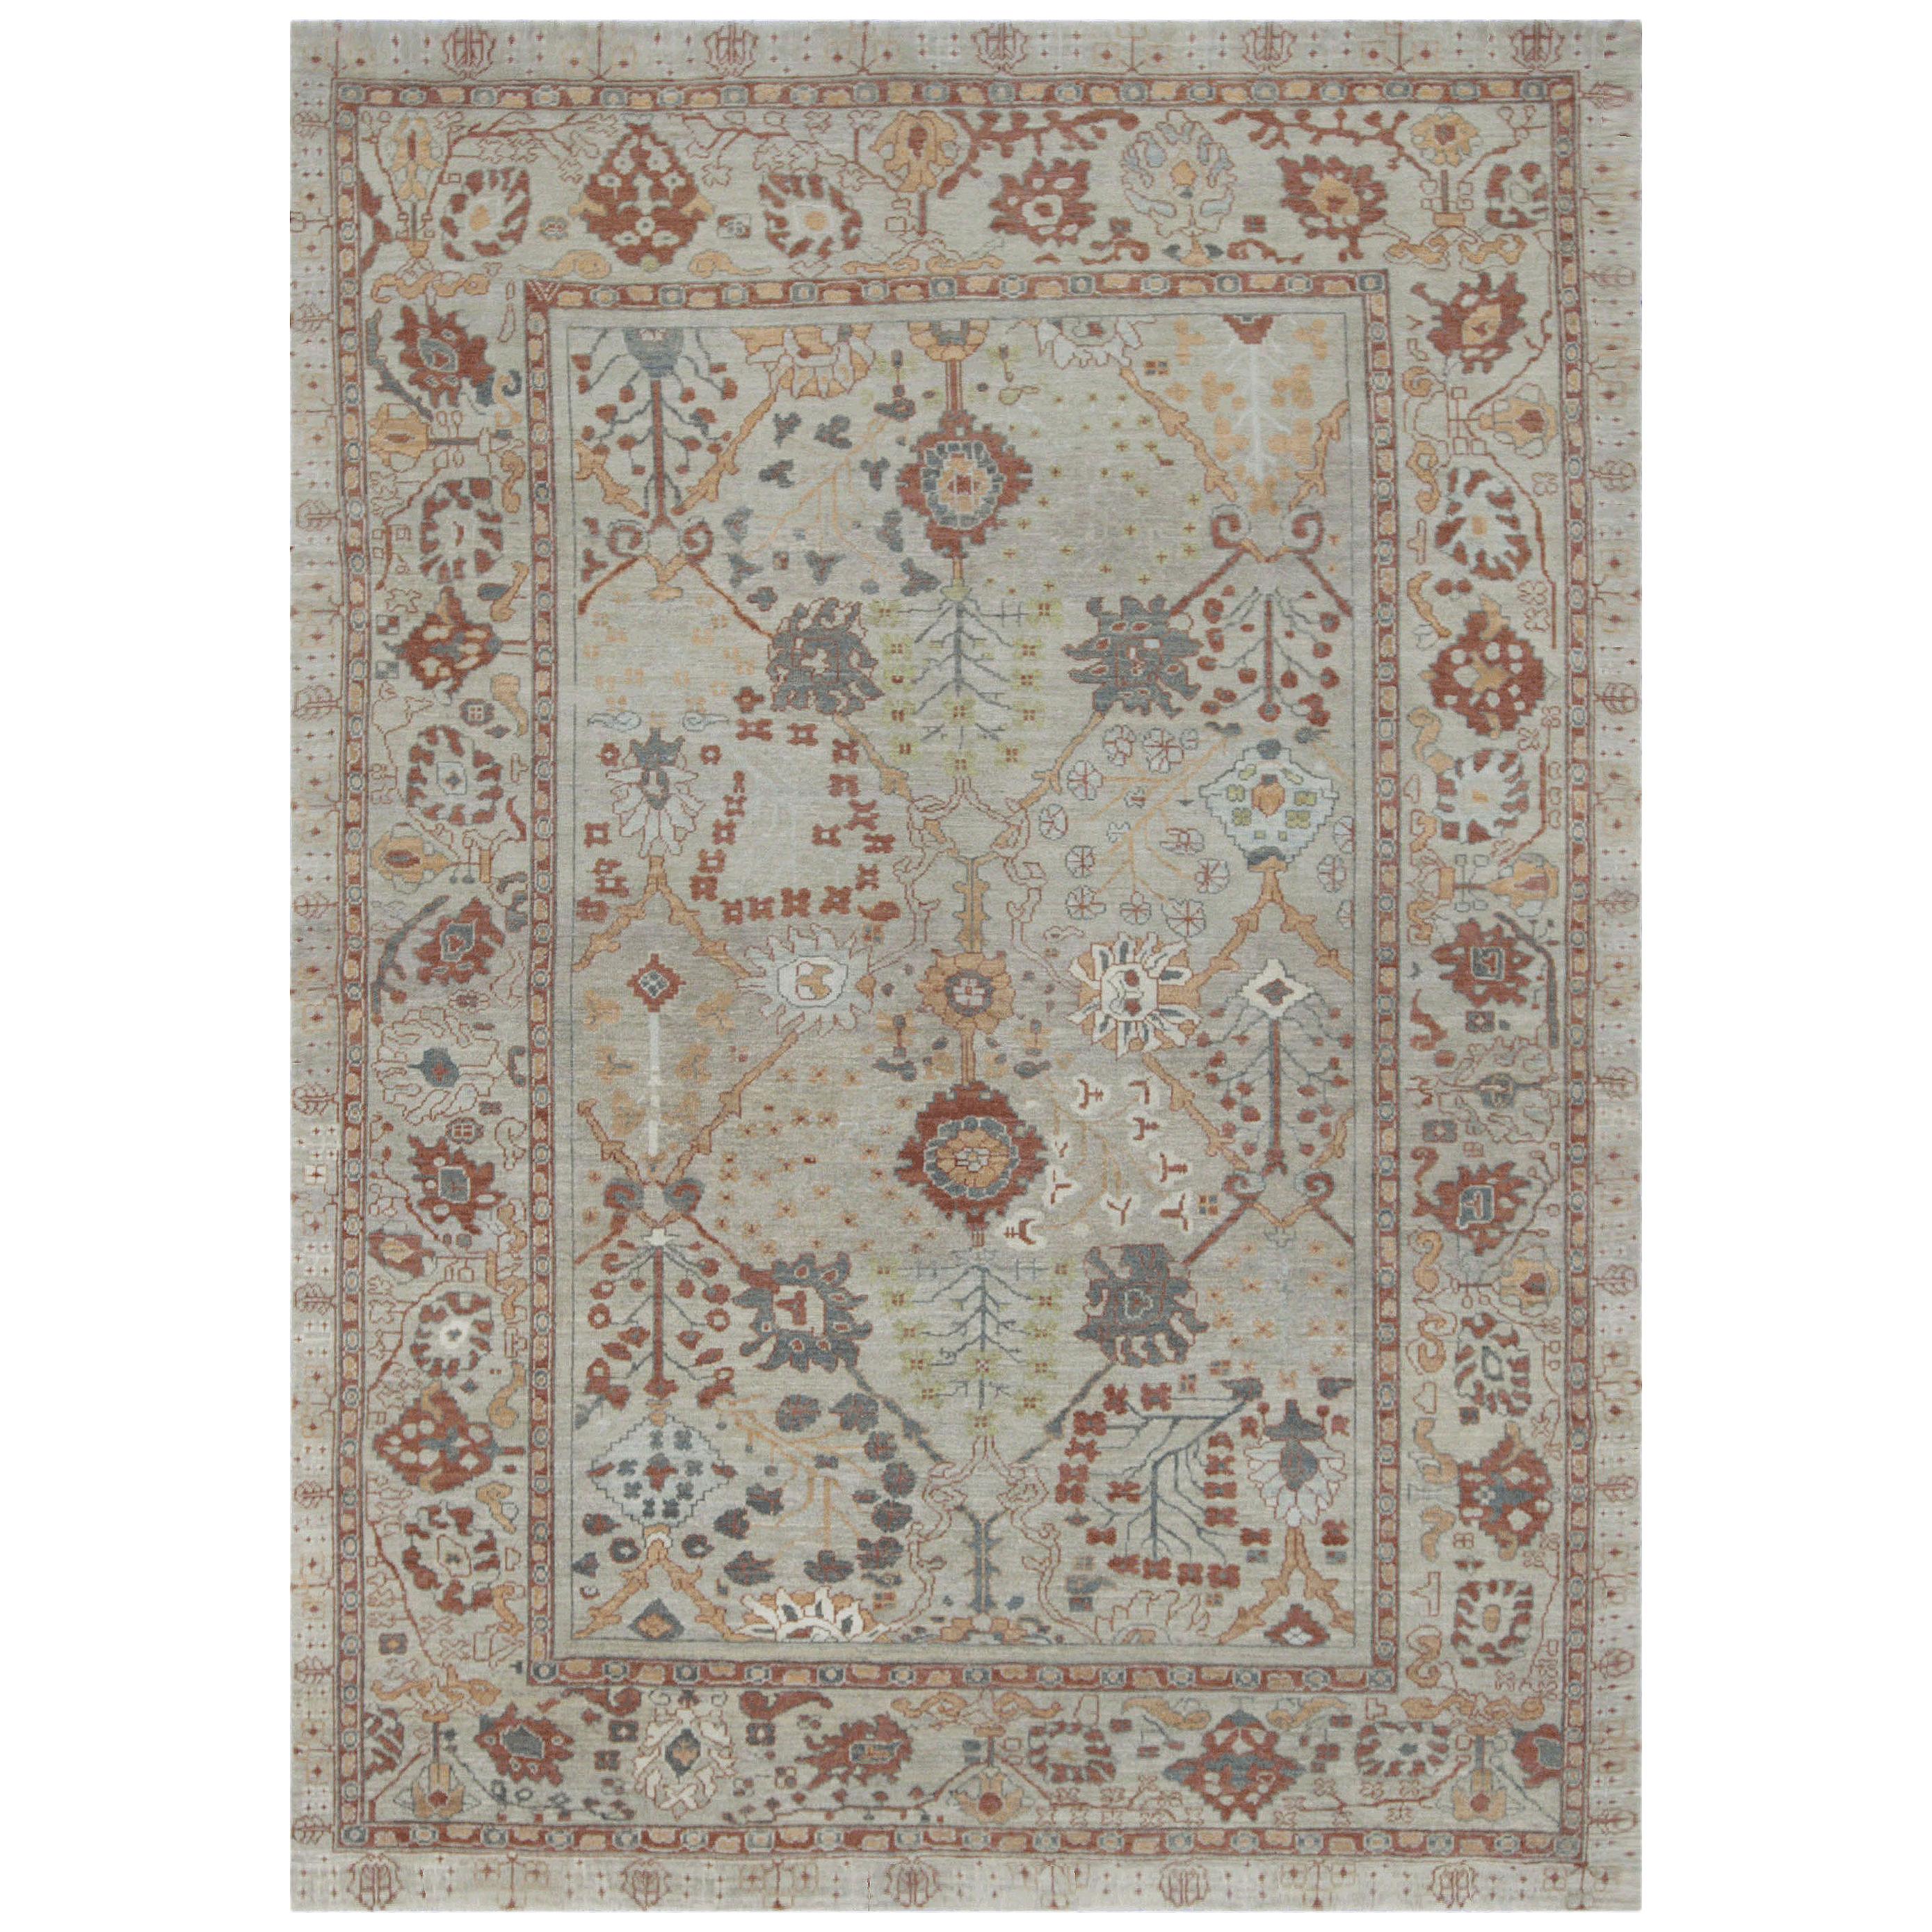 Modern Oushak Rug with Beige Field and a Mix of Red and Gray Flower Details